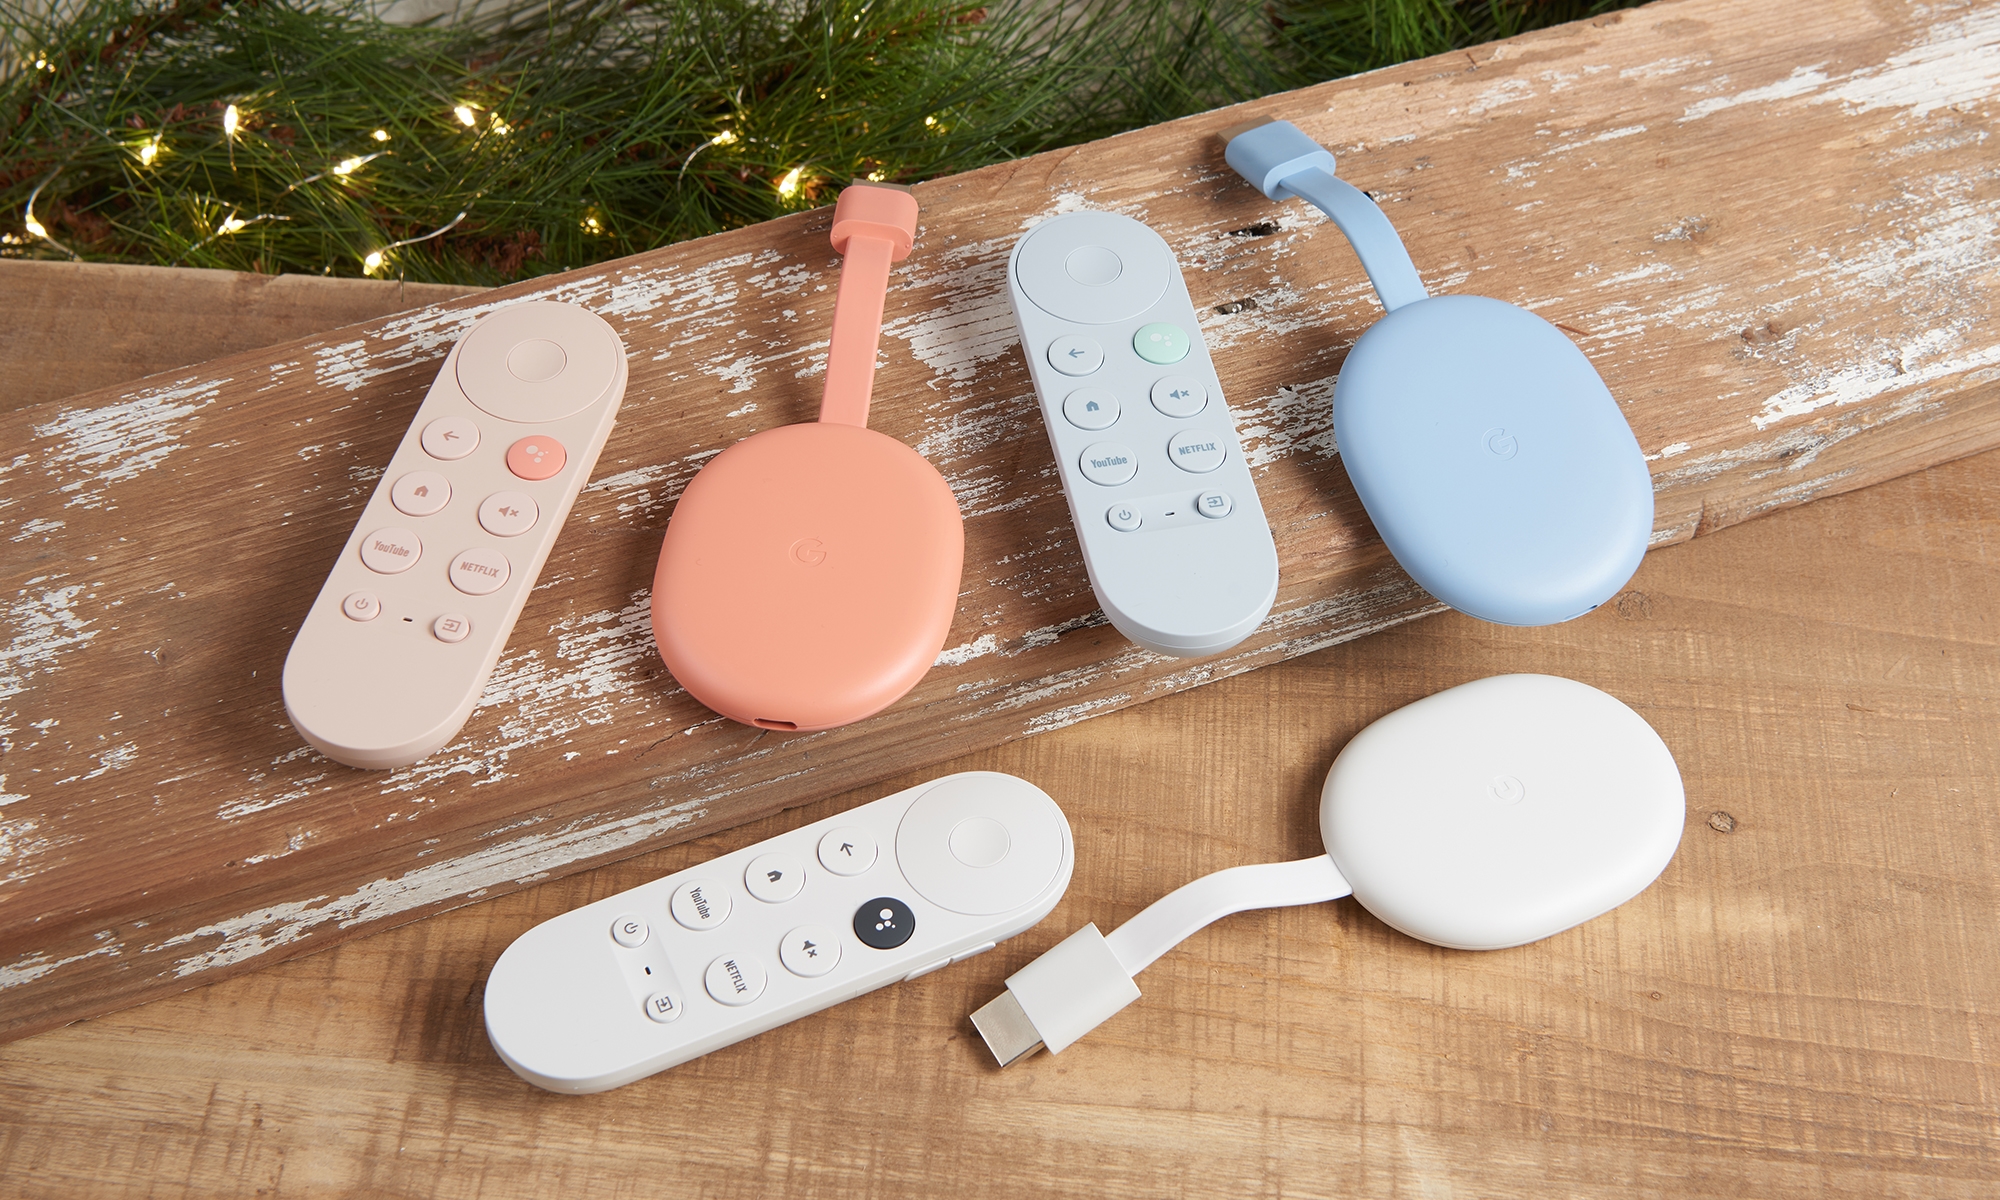 Tech gifts under $50 that make great stocking stuffers in 2022 | DeviceDaily.com